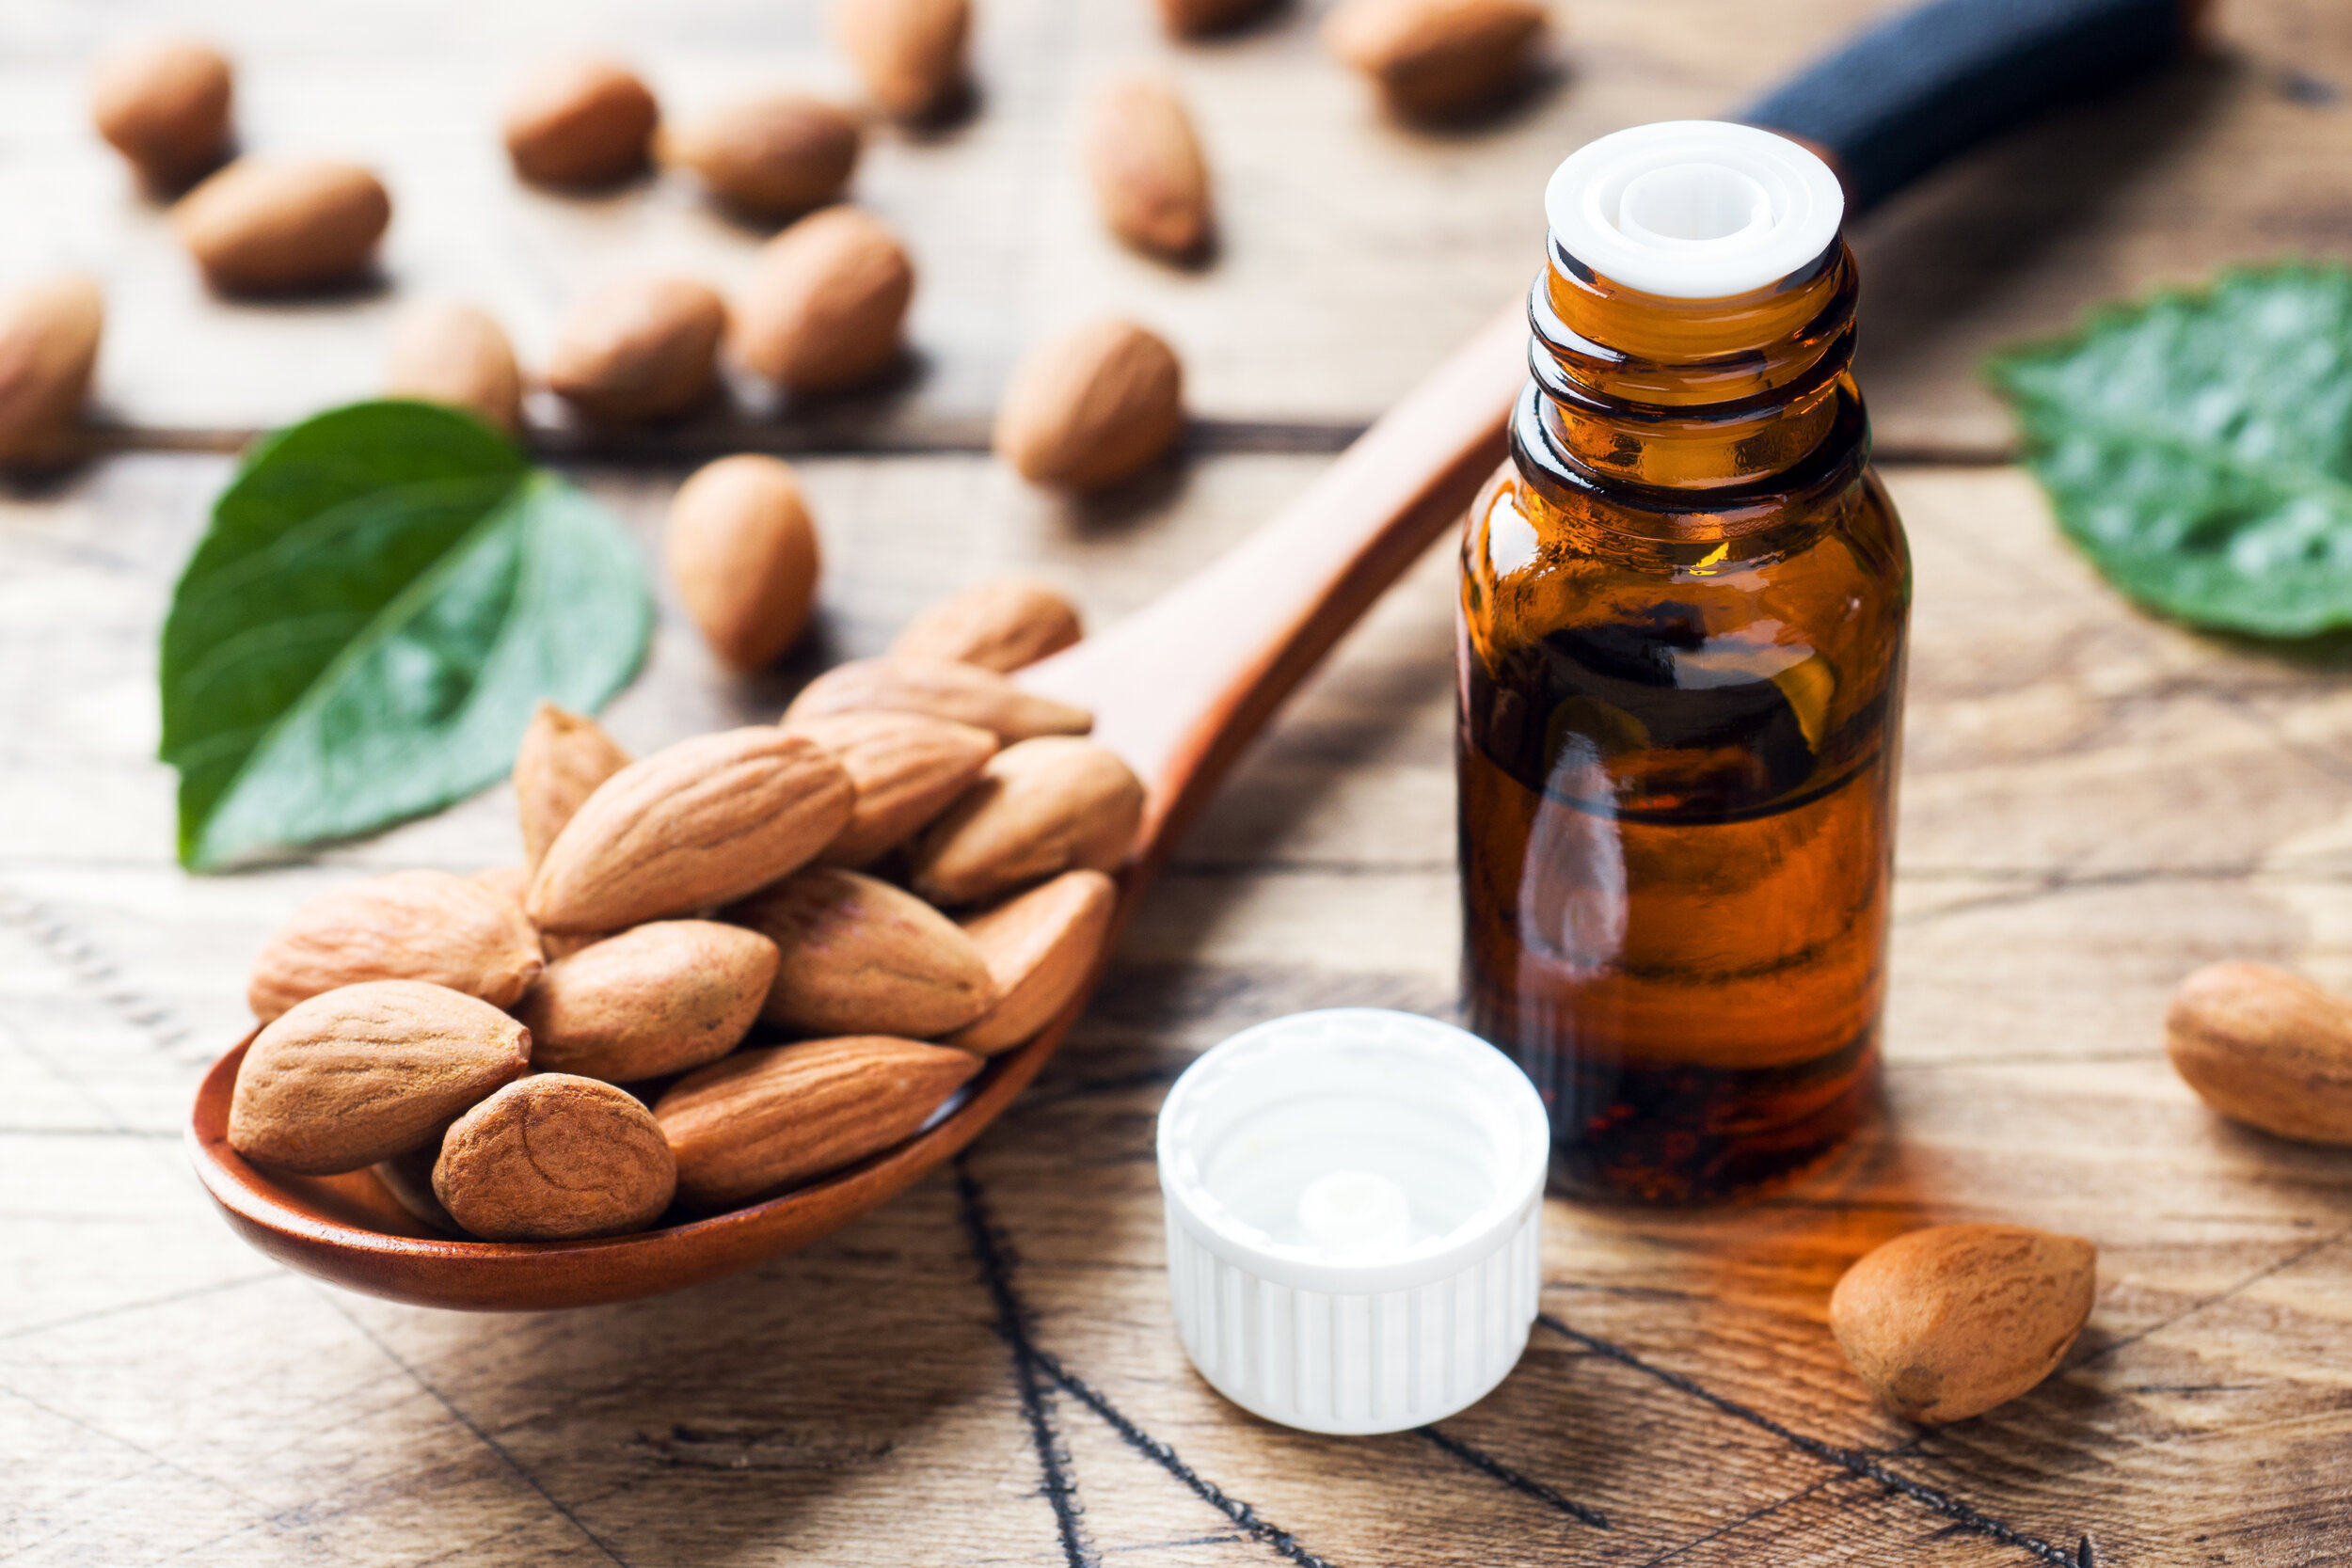 Almond in Kitchen, Culture and Cosmetics